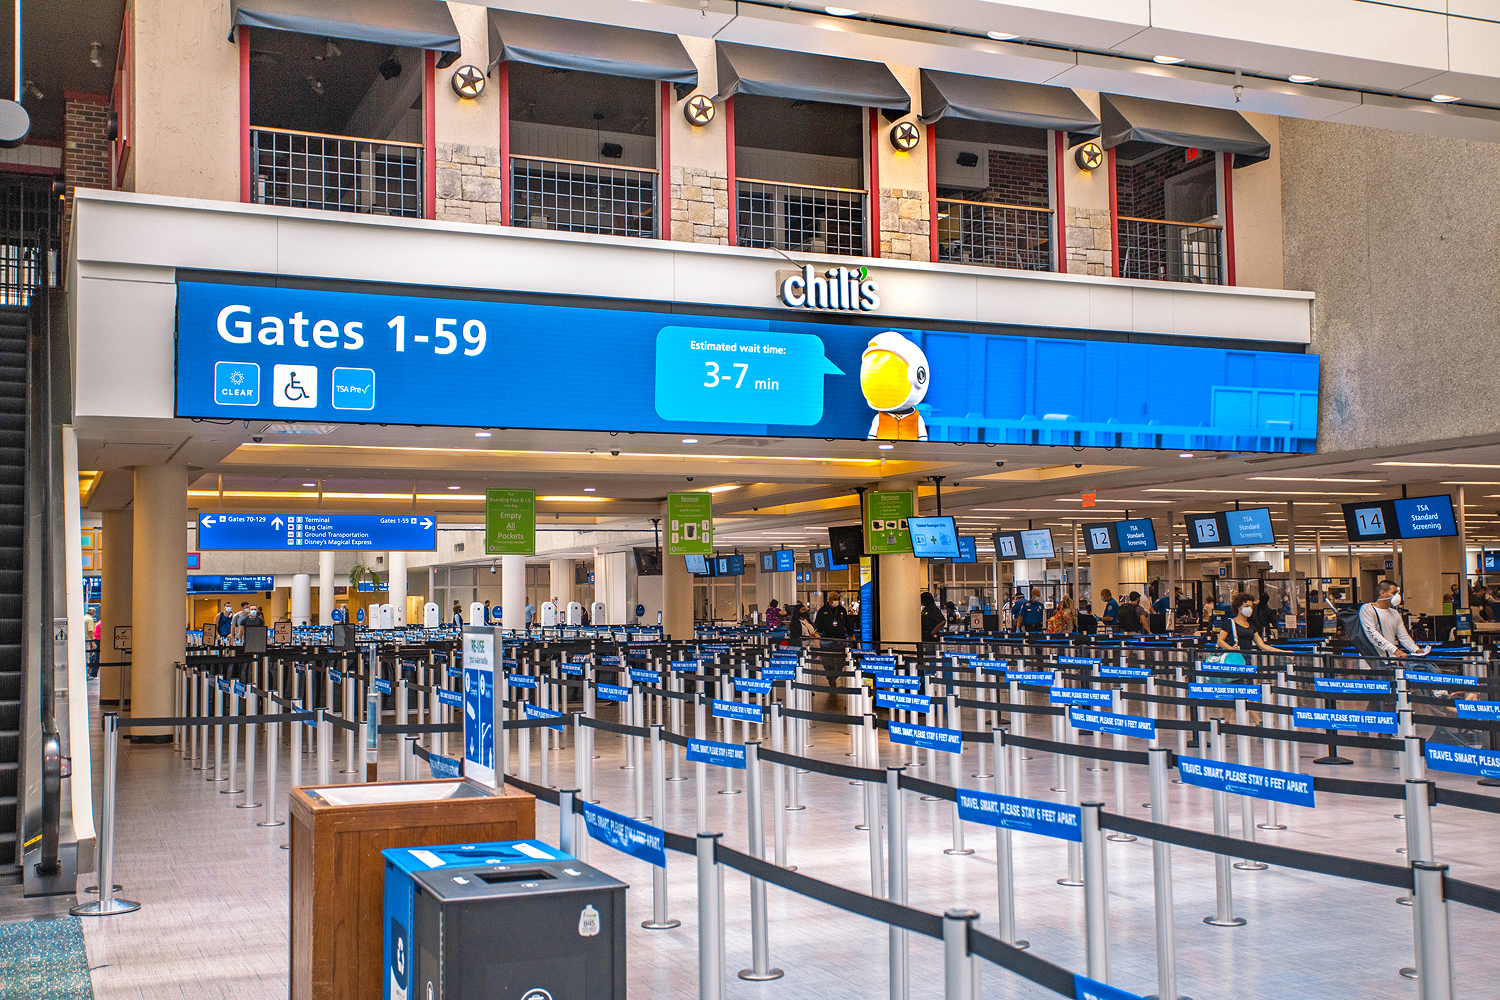 Media servers are located throughout the airport and the high resolution HDMI signals are extended to all of the displays over twisted pair cabling using Extron DTP transmitters and receivers.